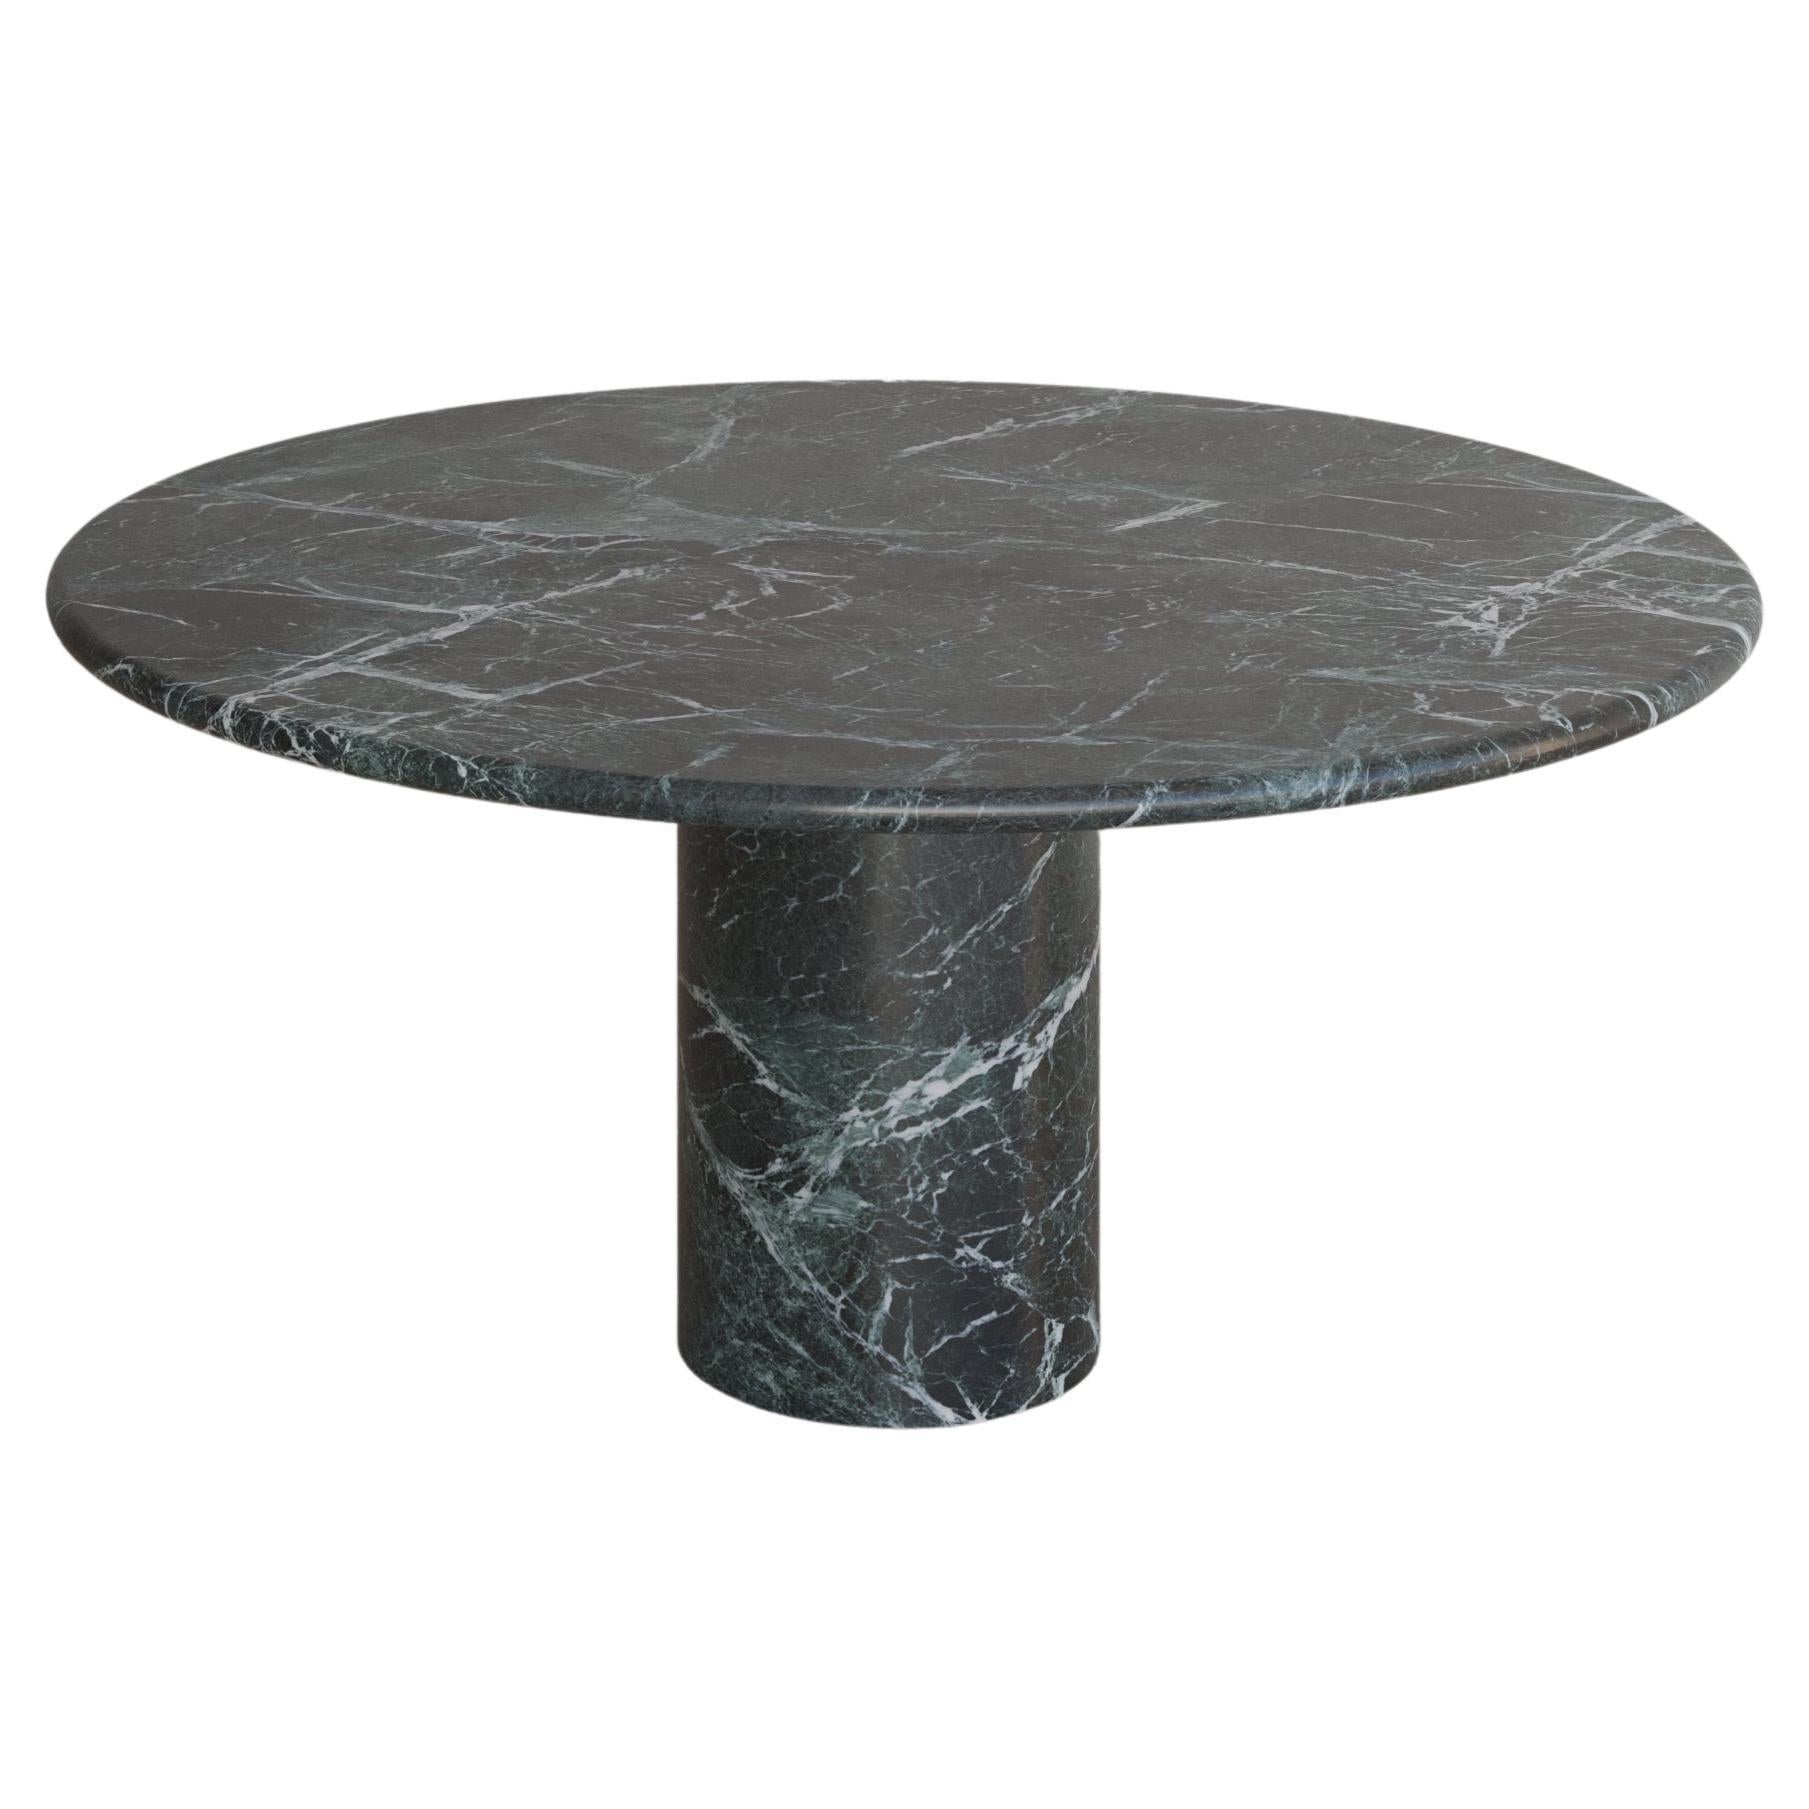 Verde Alpi Voyage Dining Table i by the Essentialist